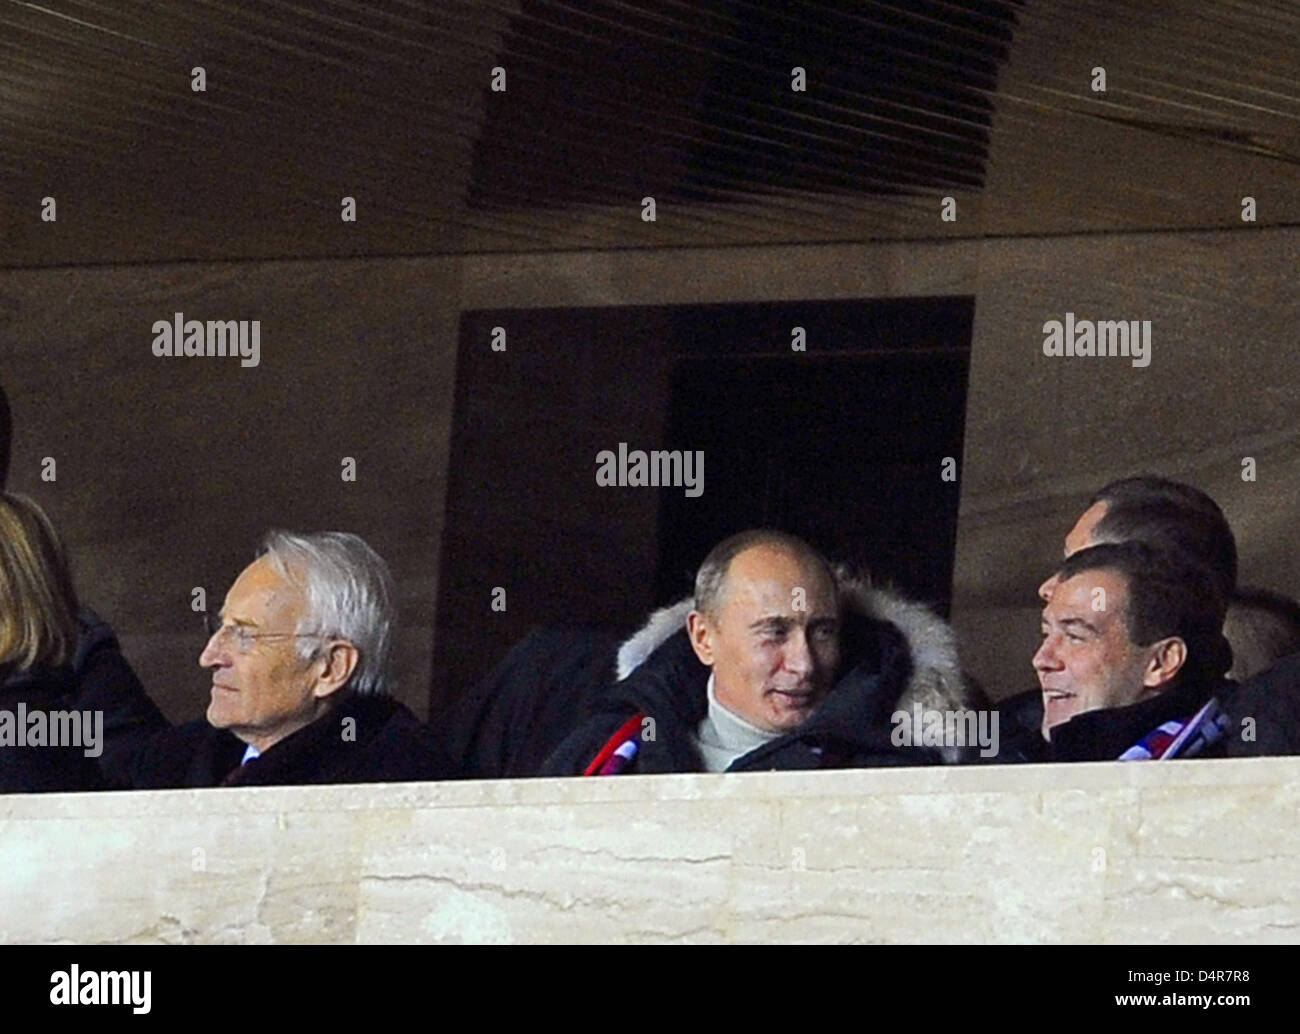 Russian Prime Minister Vladimir Putin (C), Russian President Dmitry Medvedev (R) and former Bavarian Prime Minister Edmund Stoiber (L) watch the World Cup 2010, Group 4 qualifier Russia vs Germany at Luzhniki Stadium in Moscow, Russia, 10 October 2009. Germany won 1-0. Photo: Achim Scheidemann Stock Photo